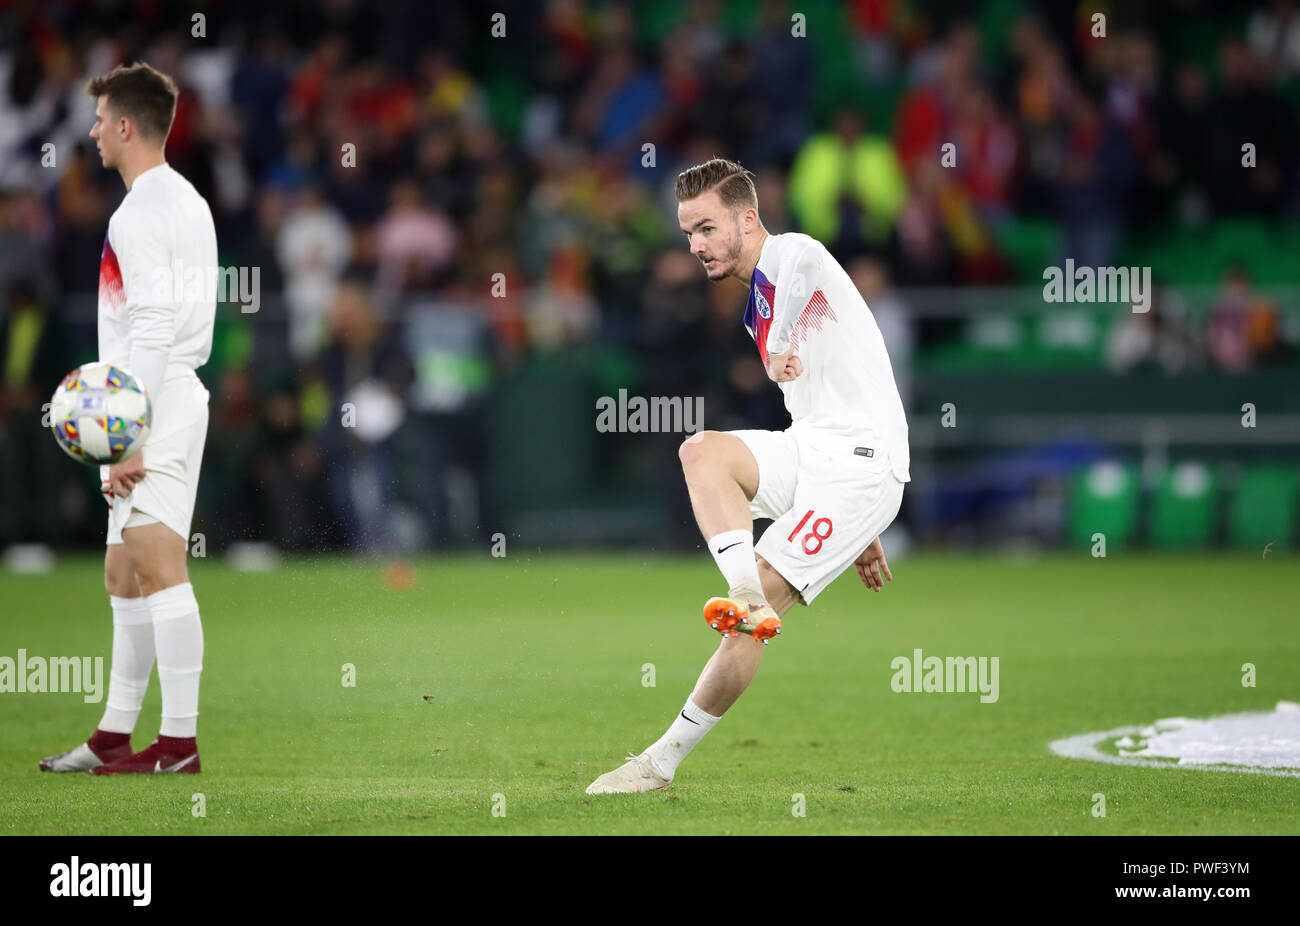 England's James Maddison warms up prior to the Nations League match at Benito Villamarin Stadium, Seville. PRESS ASSOCIATION Photo. Picture date: Monday October 15, 2018. See PA story SOCCER Spain. Photo credit should read: Nick Potts/PA Wire. Stock Photo